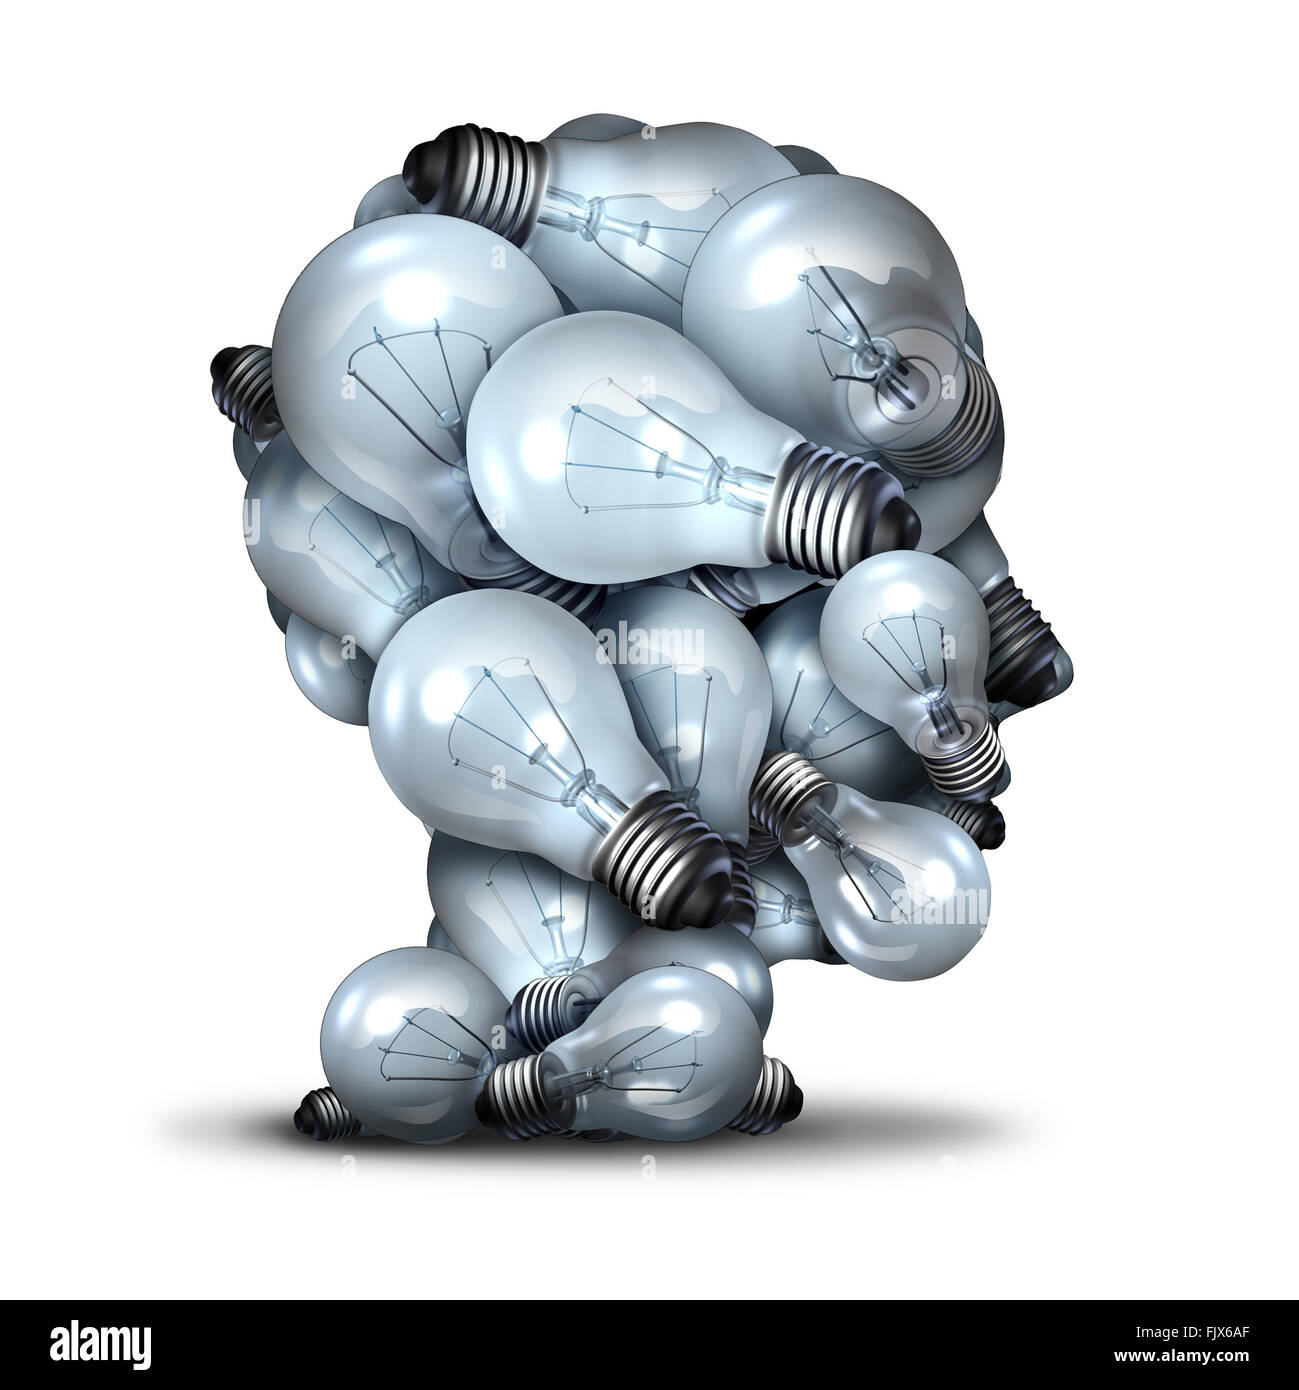 Light bulb head creativity and the power of imagination concept as a group of lightbulbs shaped as a human face as an inspiration symbol for thinking of new ideas and the inventive mind. Stock Photo